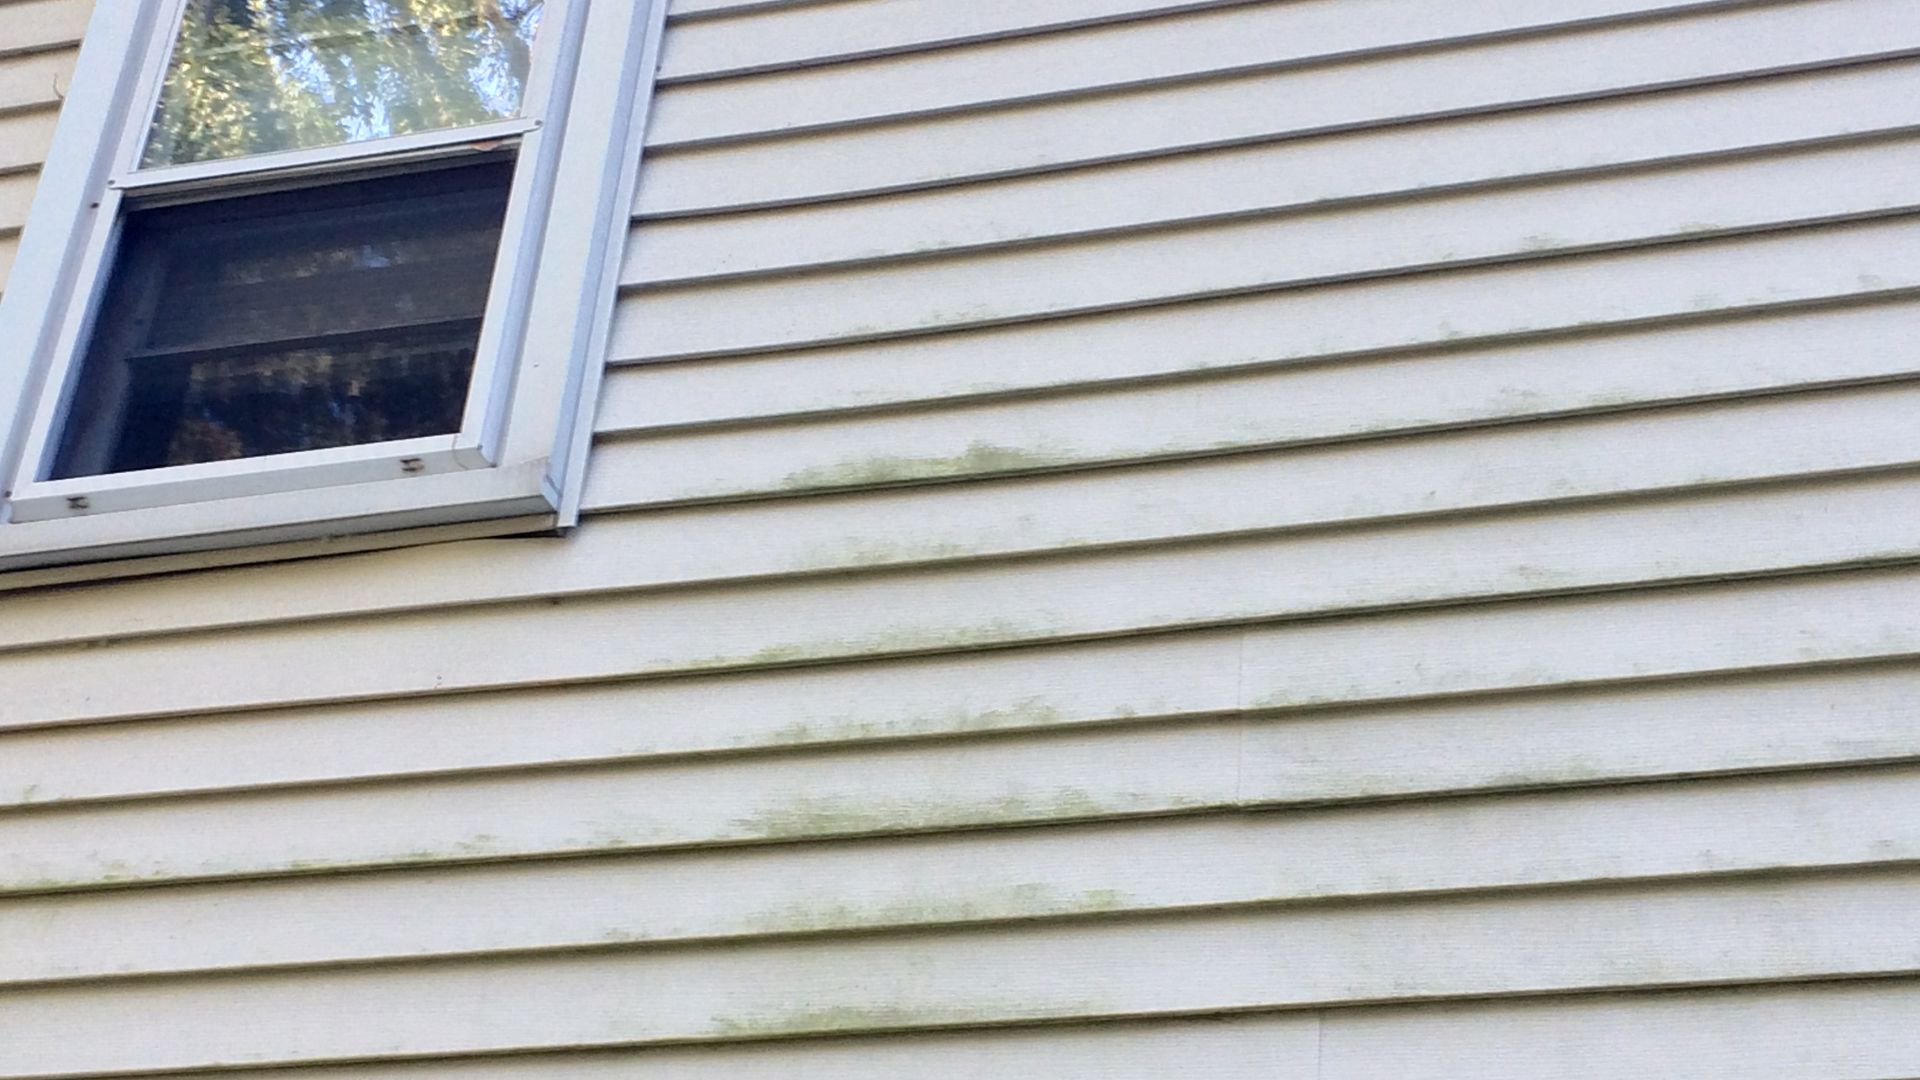 Siding replacement and repair for water damaged siding by Preferred Home Improvement.